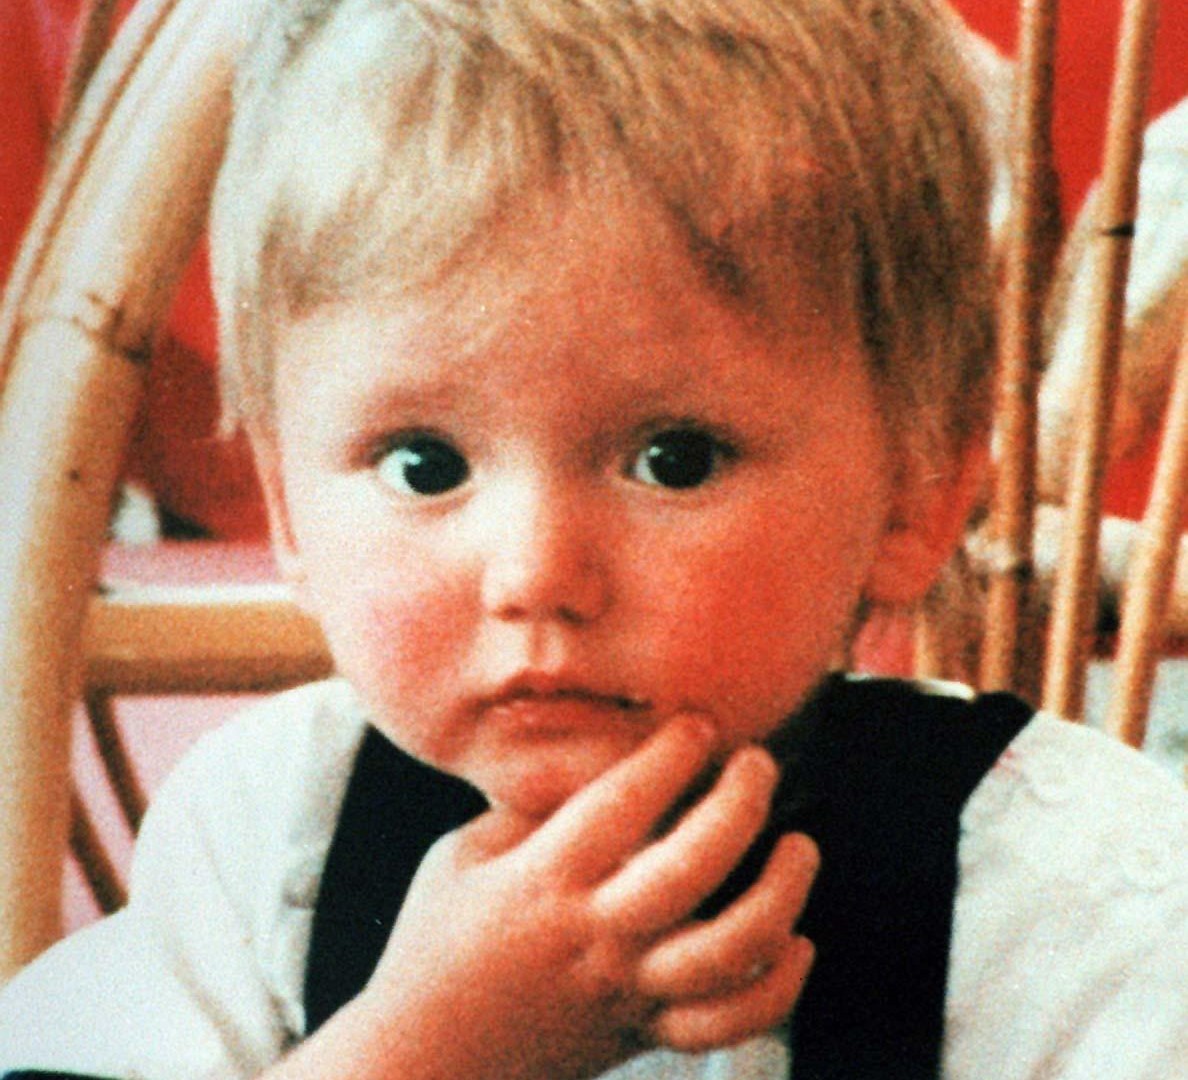 Ben Needham’s mum breaks silence as cops rule body found in river is NOT her son who vanished 32 years ago